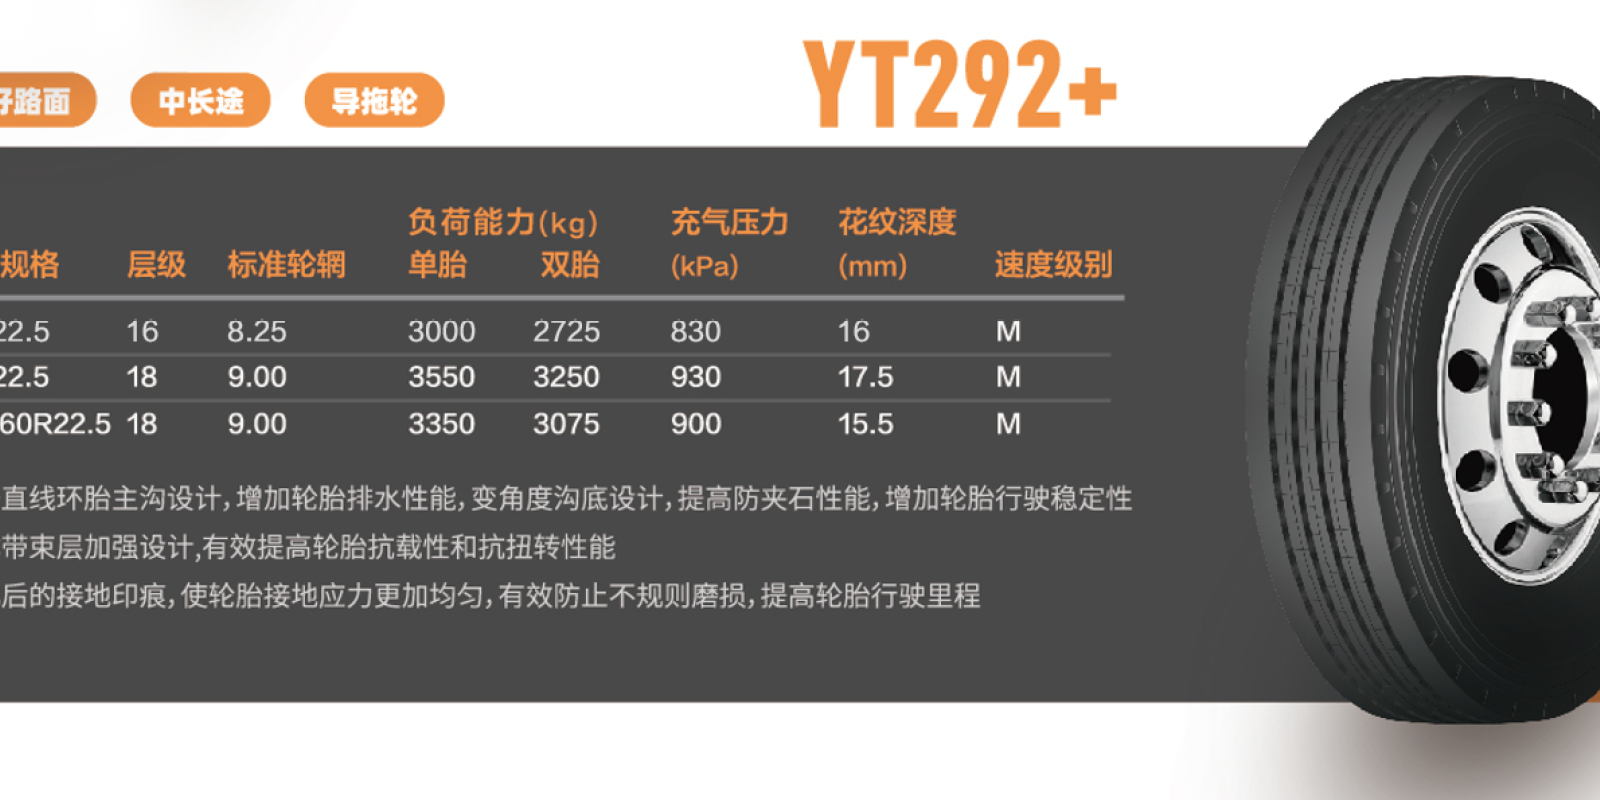 YONGMAI 勇迈 YT292+ This pattern is only used for Semi-trailers and container vehicles.